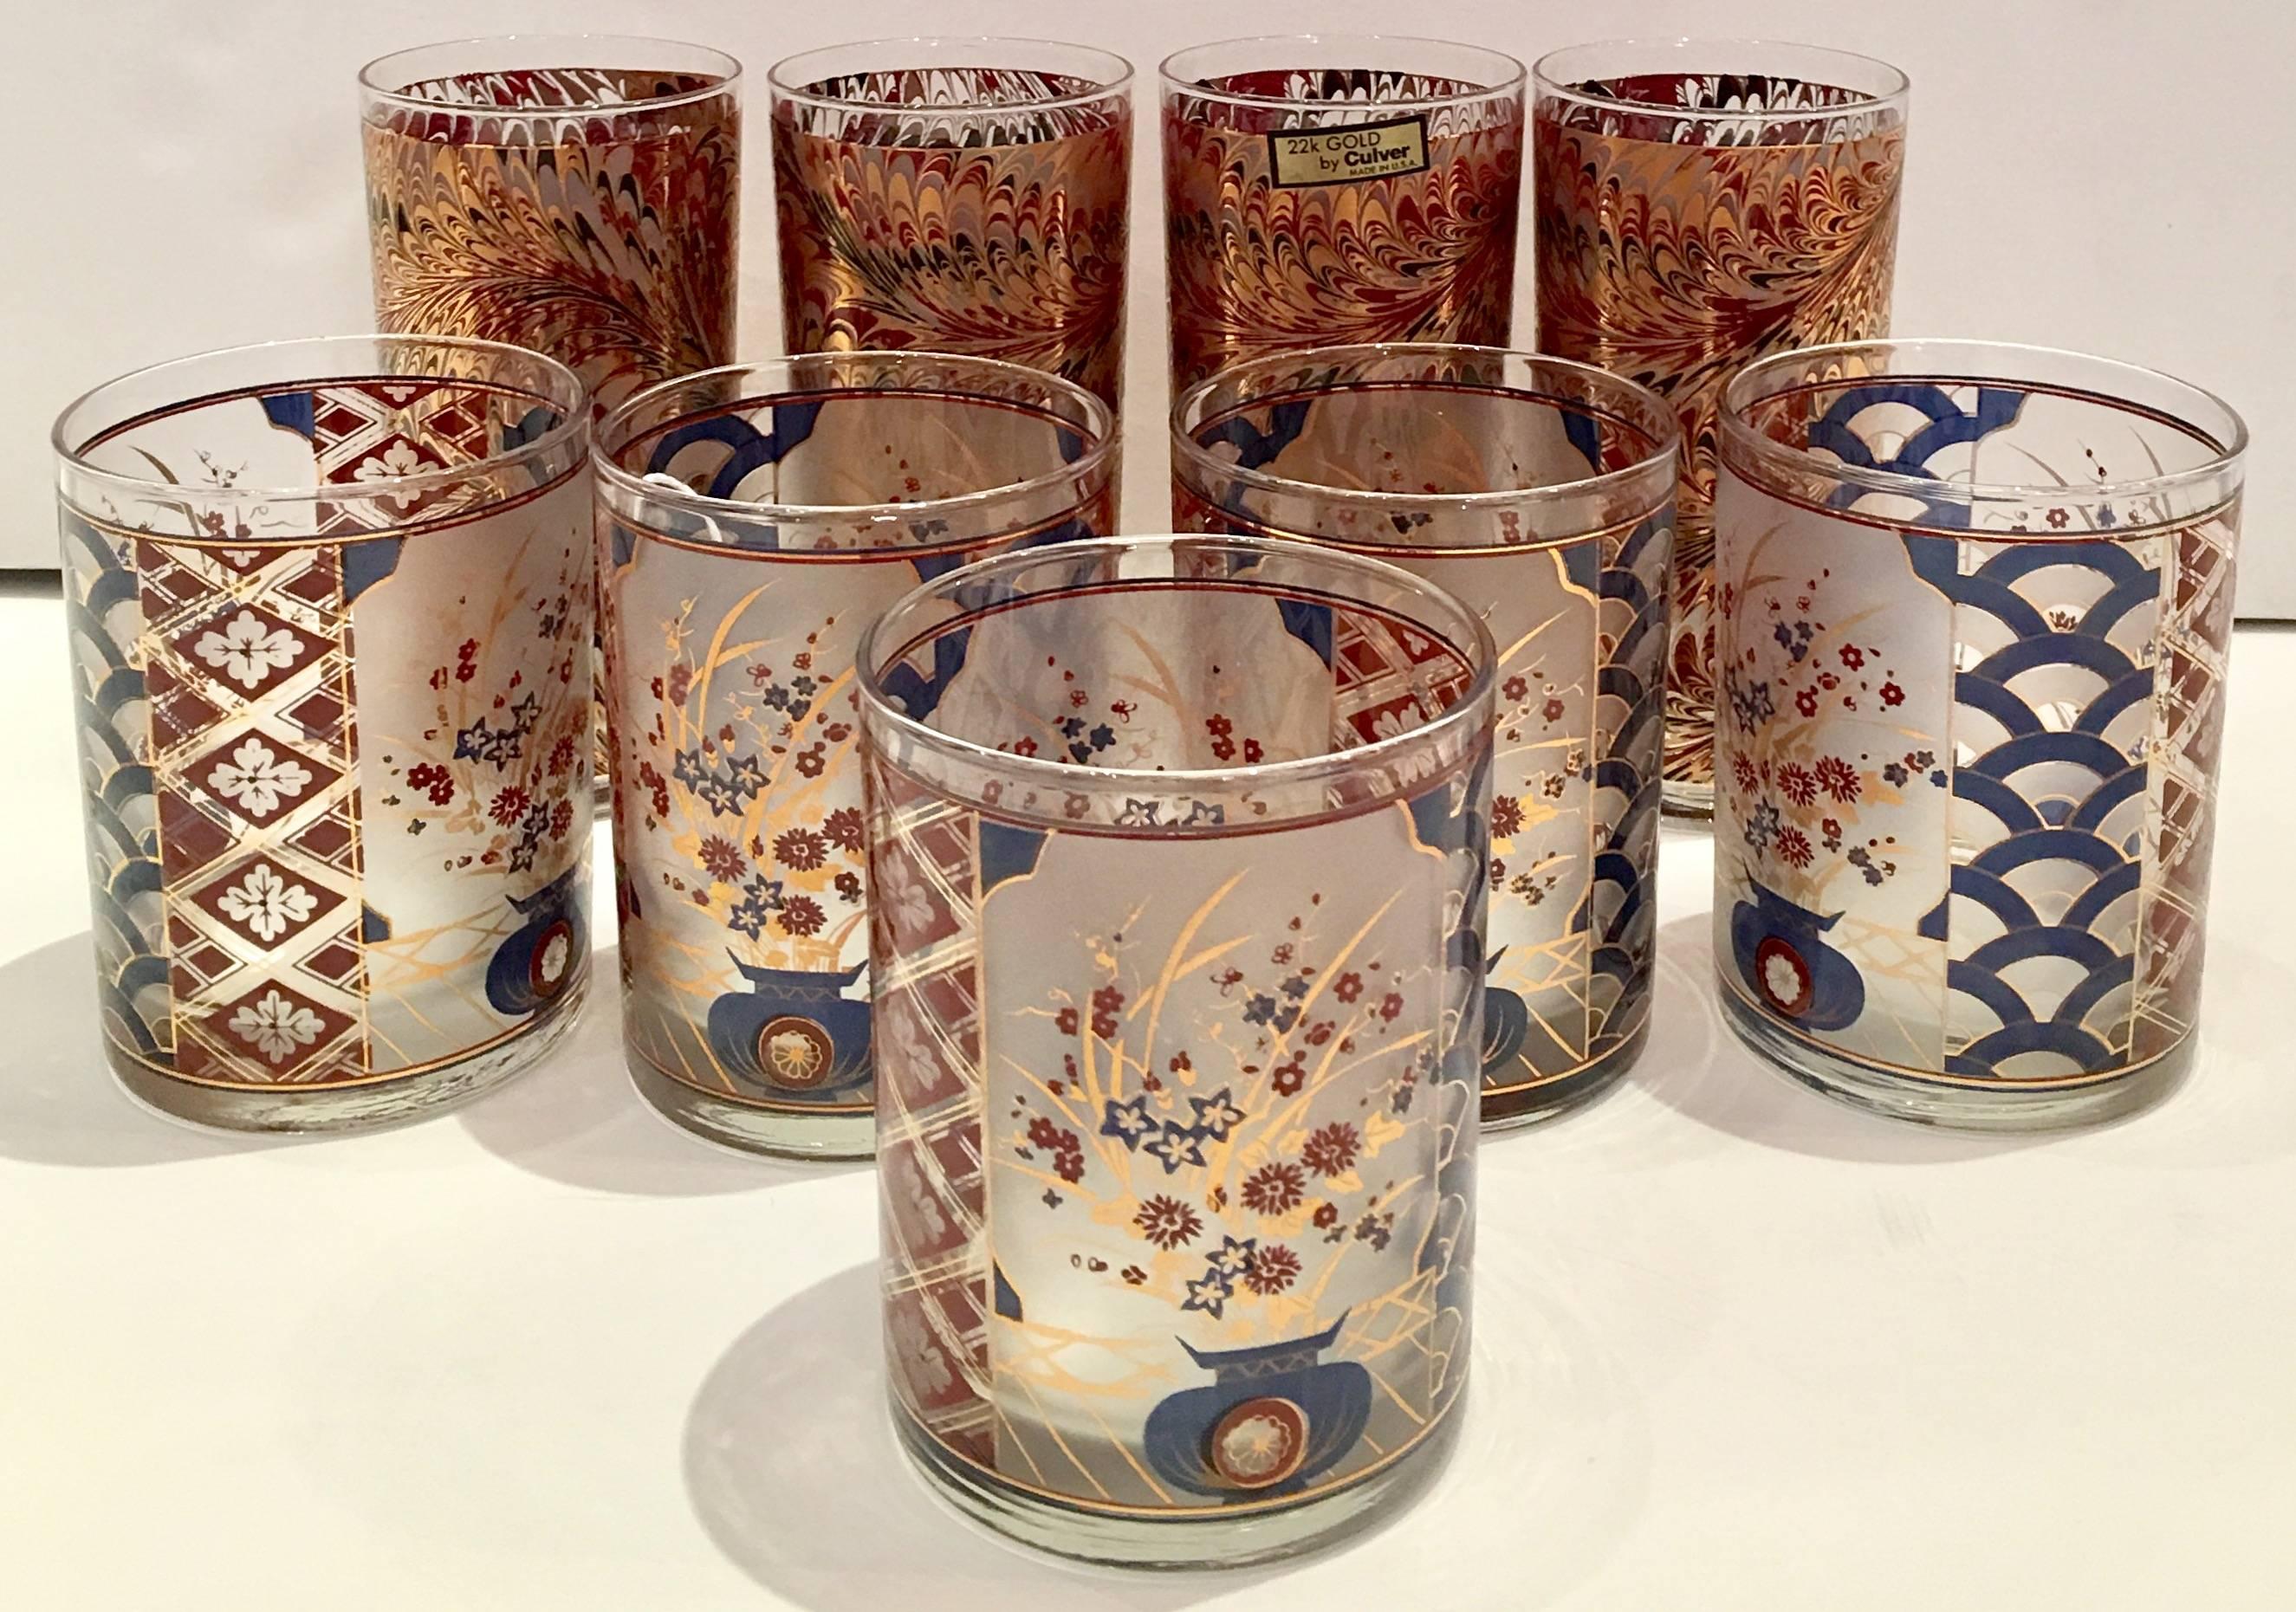 Vintage culver Limited 22-karat paisley and Imari motif nine-piece drinks set. Set includes, four paisley pattern high ball glasses and five Imari pattern double old fashion glasses. Several of the glasses have the original culver Ltd. manufactures